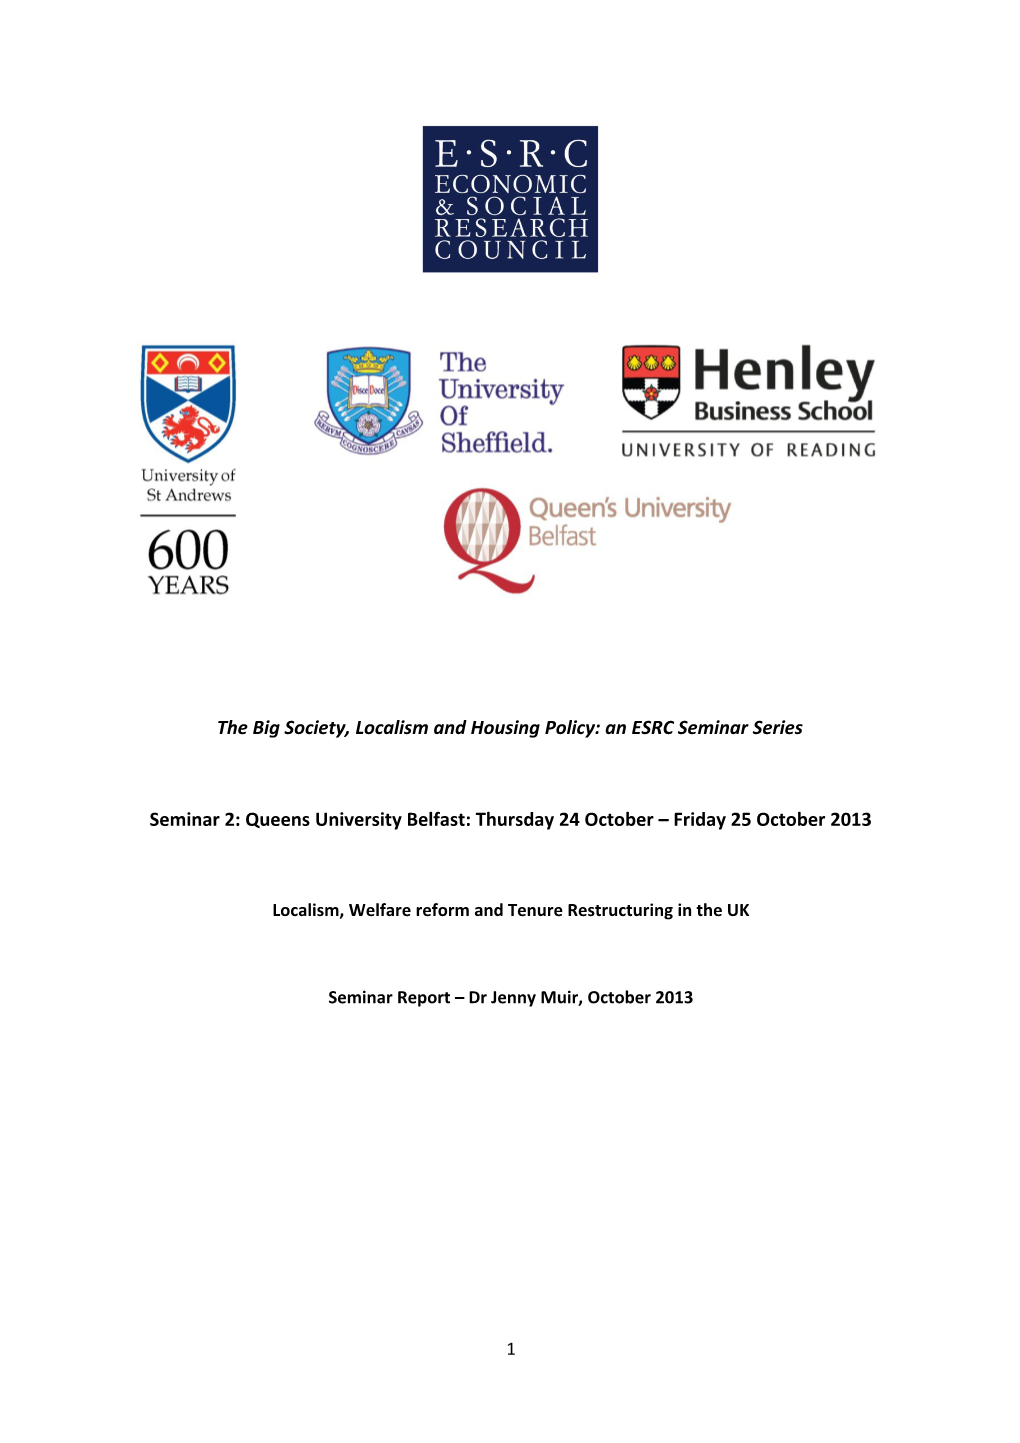 The Big Society, Localism and Housing Policy: an ESRC Seminar Series